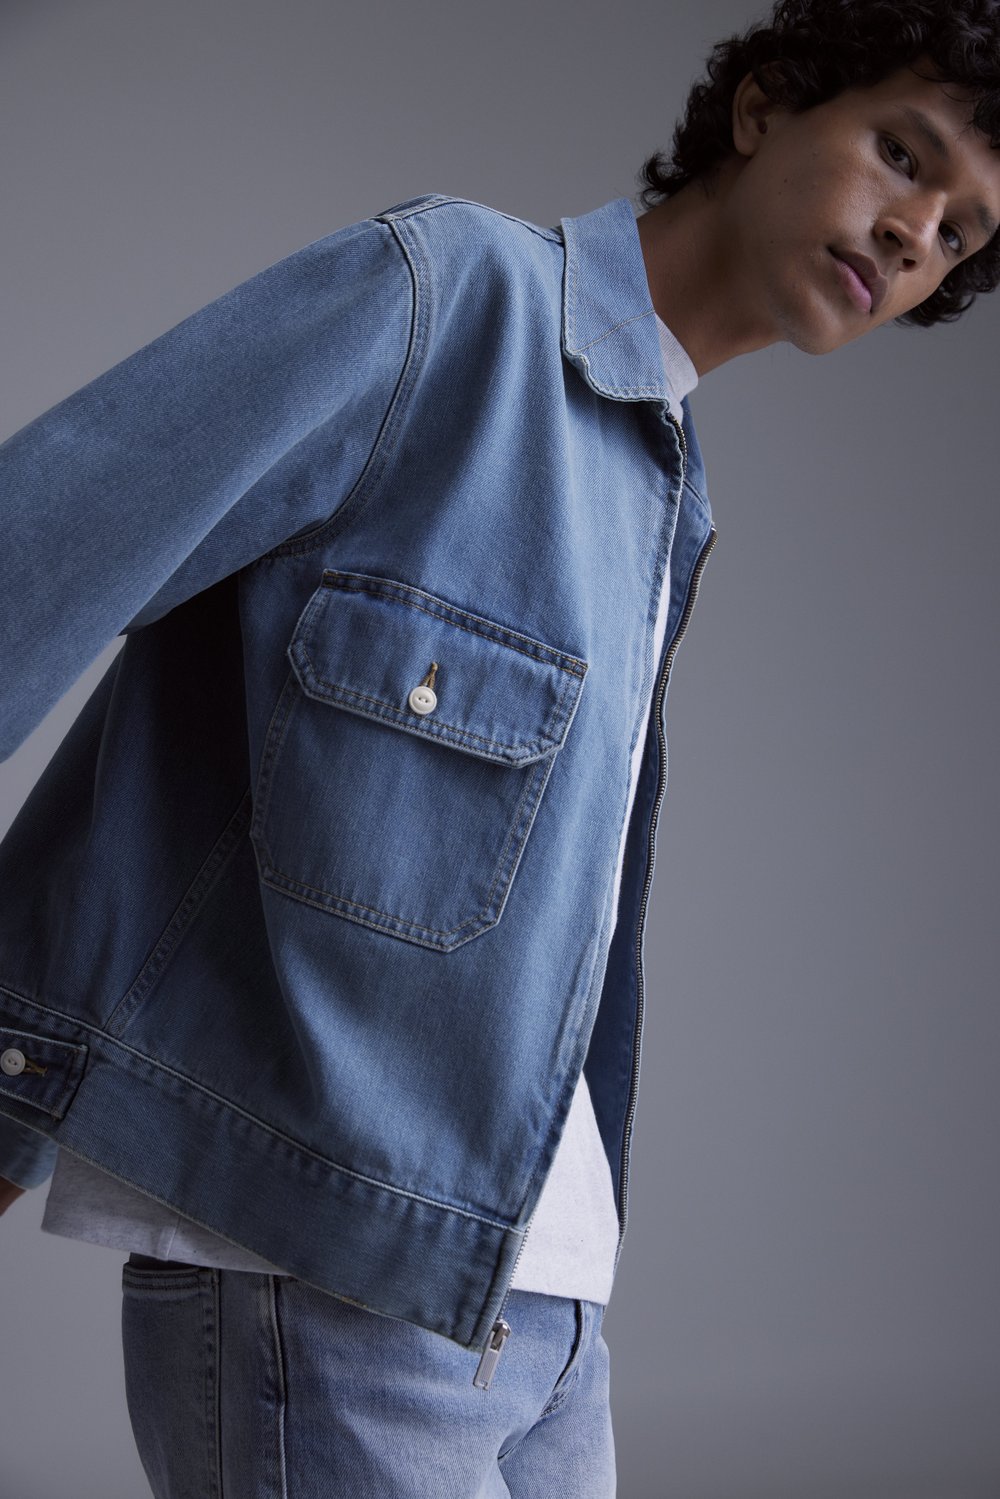 Levi's Made & Crafted SS23 — The Rakish Gent